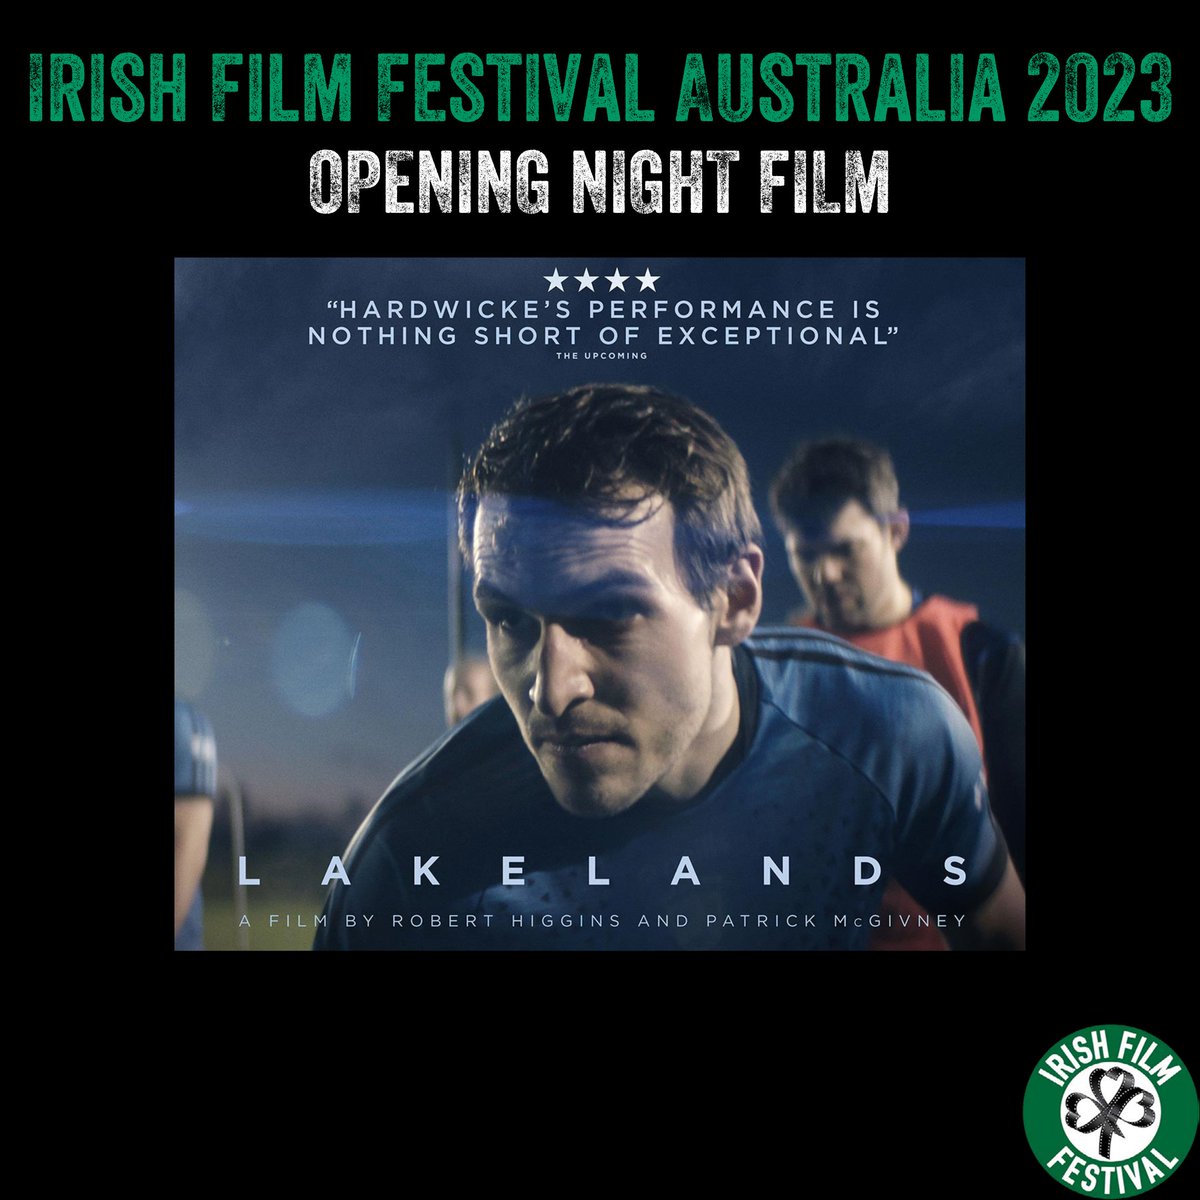 We are delighted to announce our 2023 IFF Opening Night Film Lakelands, starring Éanna Hardwicke & Danielle Galligan. This unique film is the feature debut for writers & directors Robert Higgins and Patrick McGivney, winning Best Film at 2022 GFF & KIFF. irishfilmfestival.com.au/lakelands/